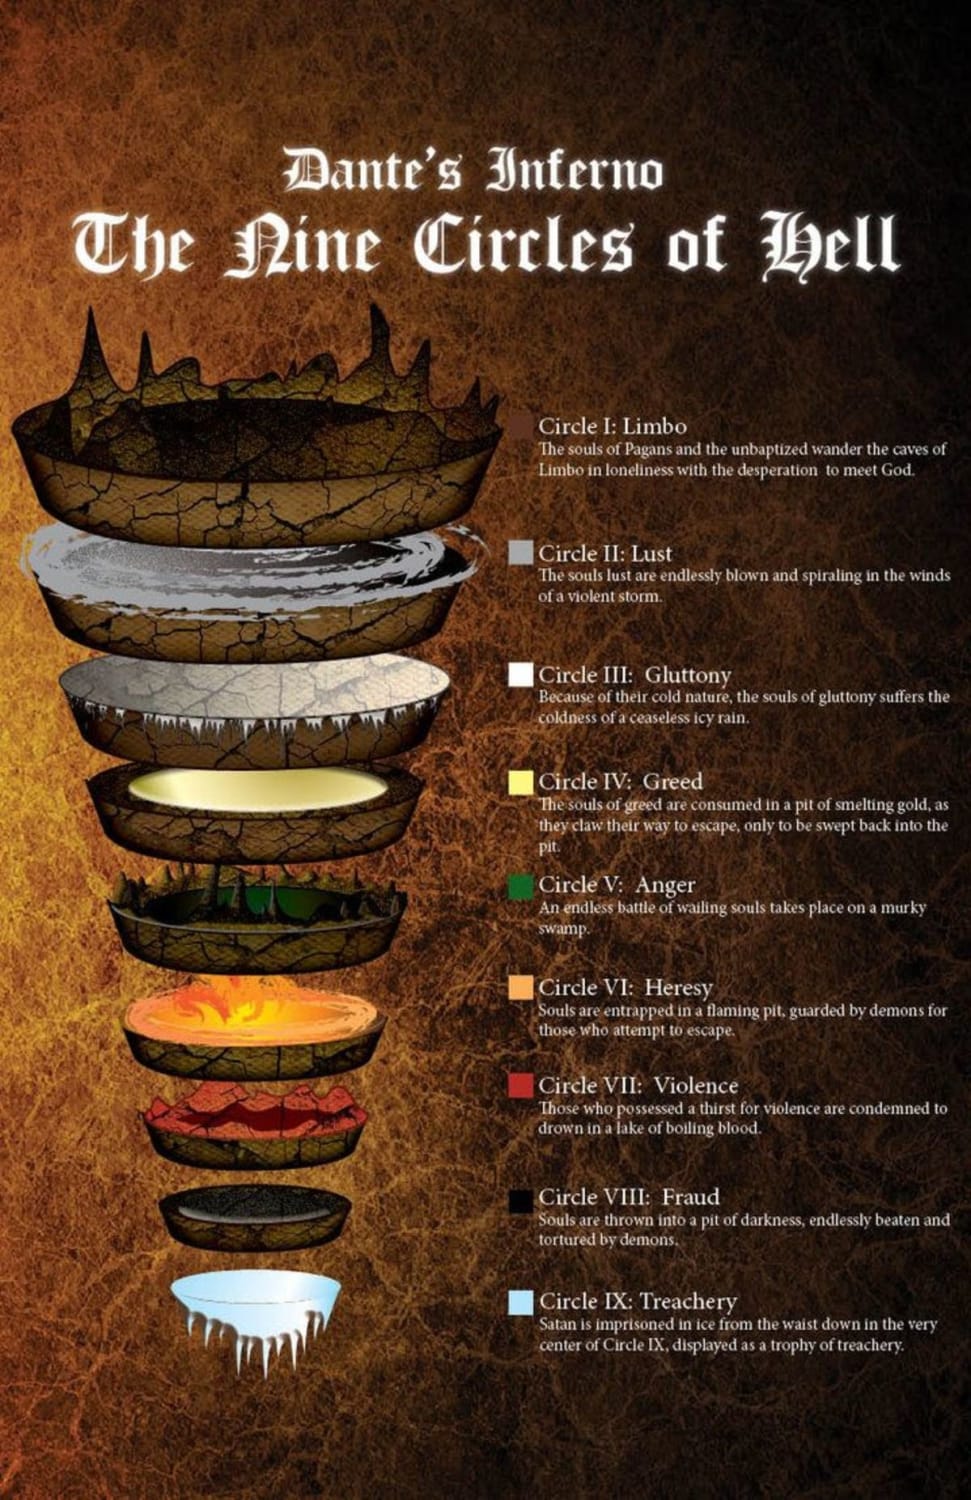 The Nine Circles of Hell according to Dante's Inferno